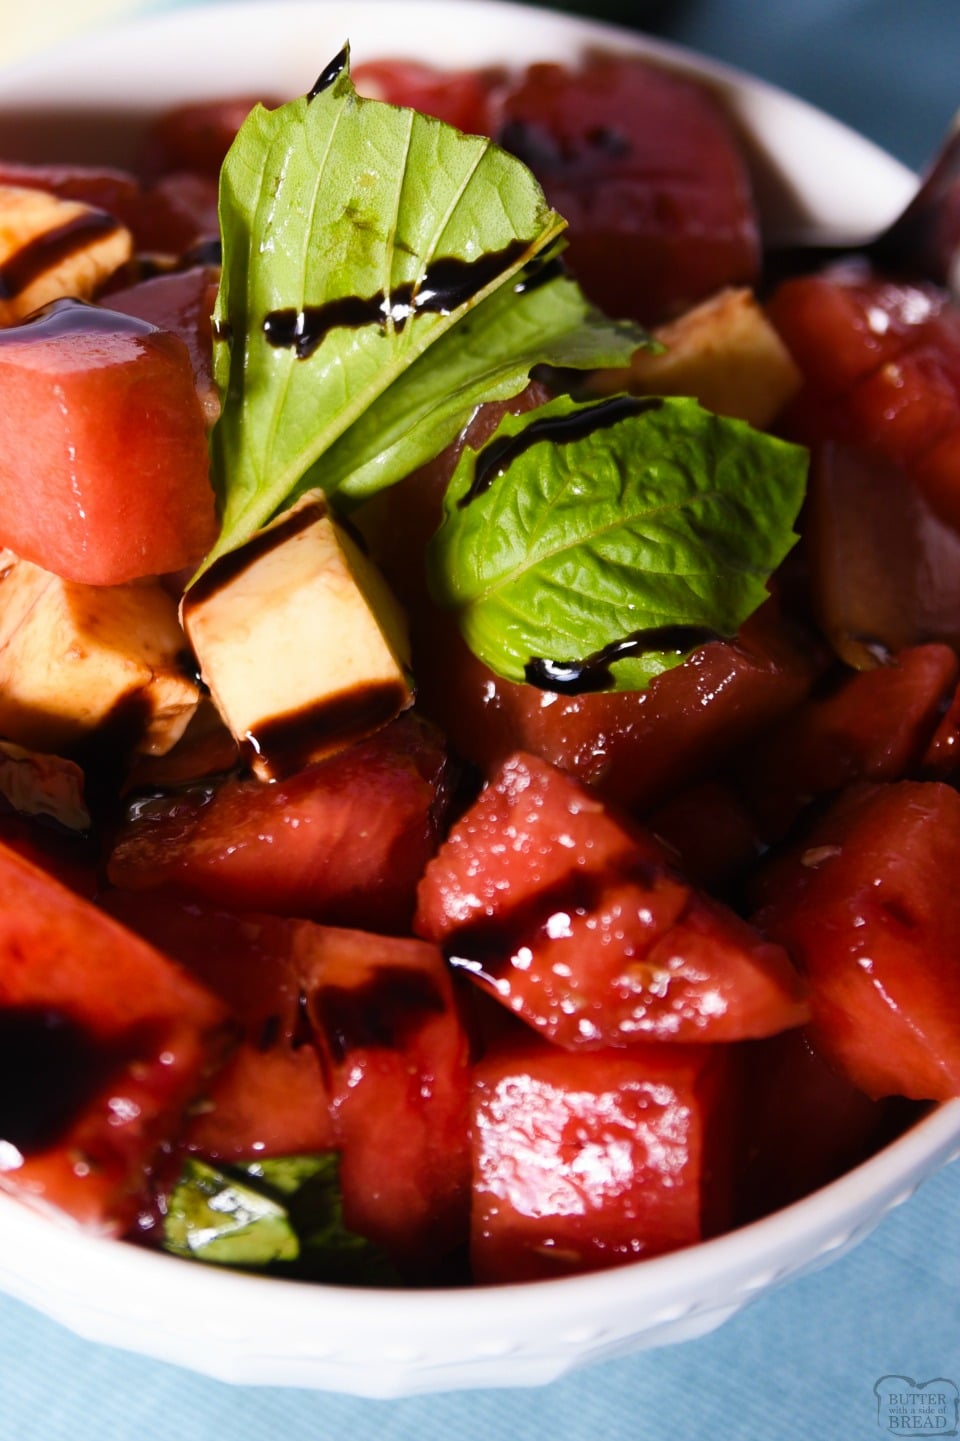 Watermelon Salad recipe with just 4 ingredients! Delightful mix of sweet and savory flavors in this watermelon salad with basil and balsamic vinegar! 